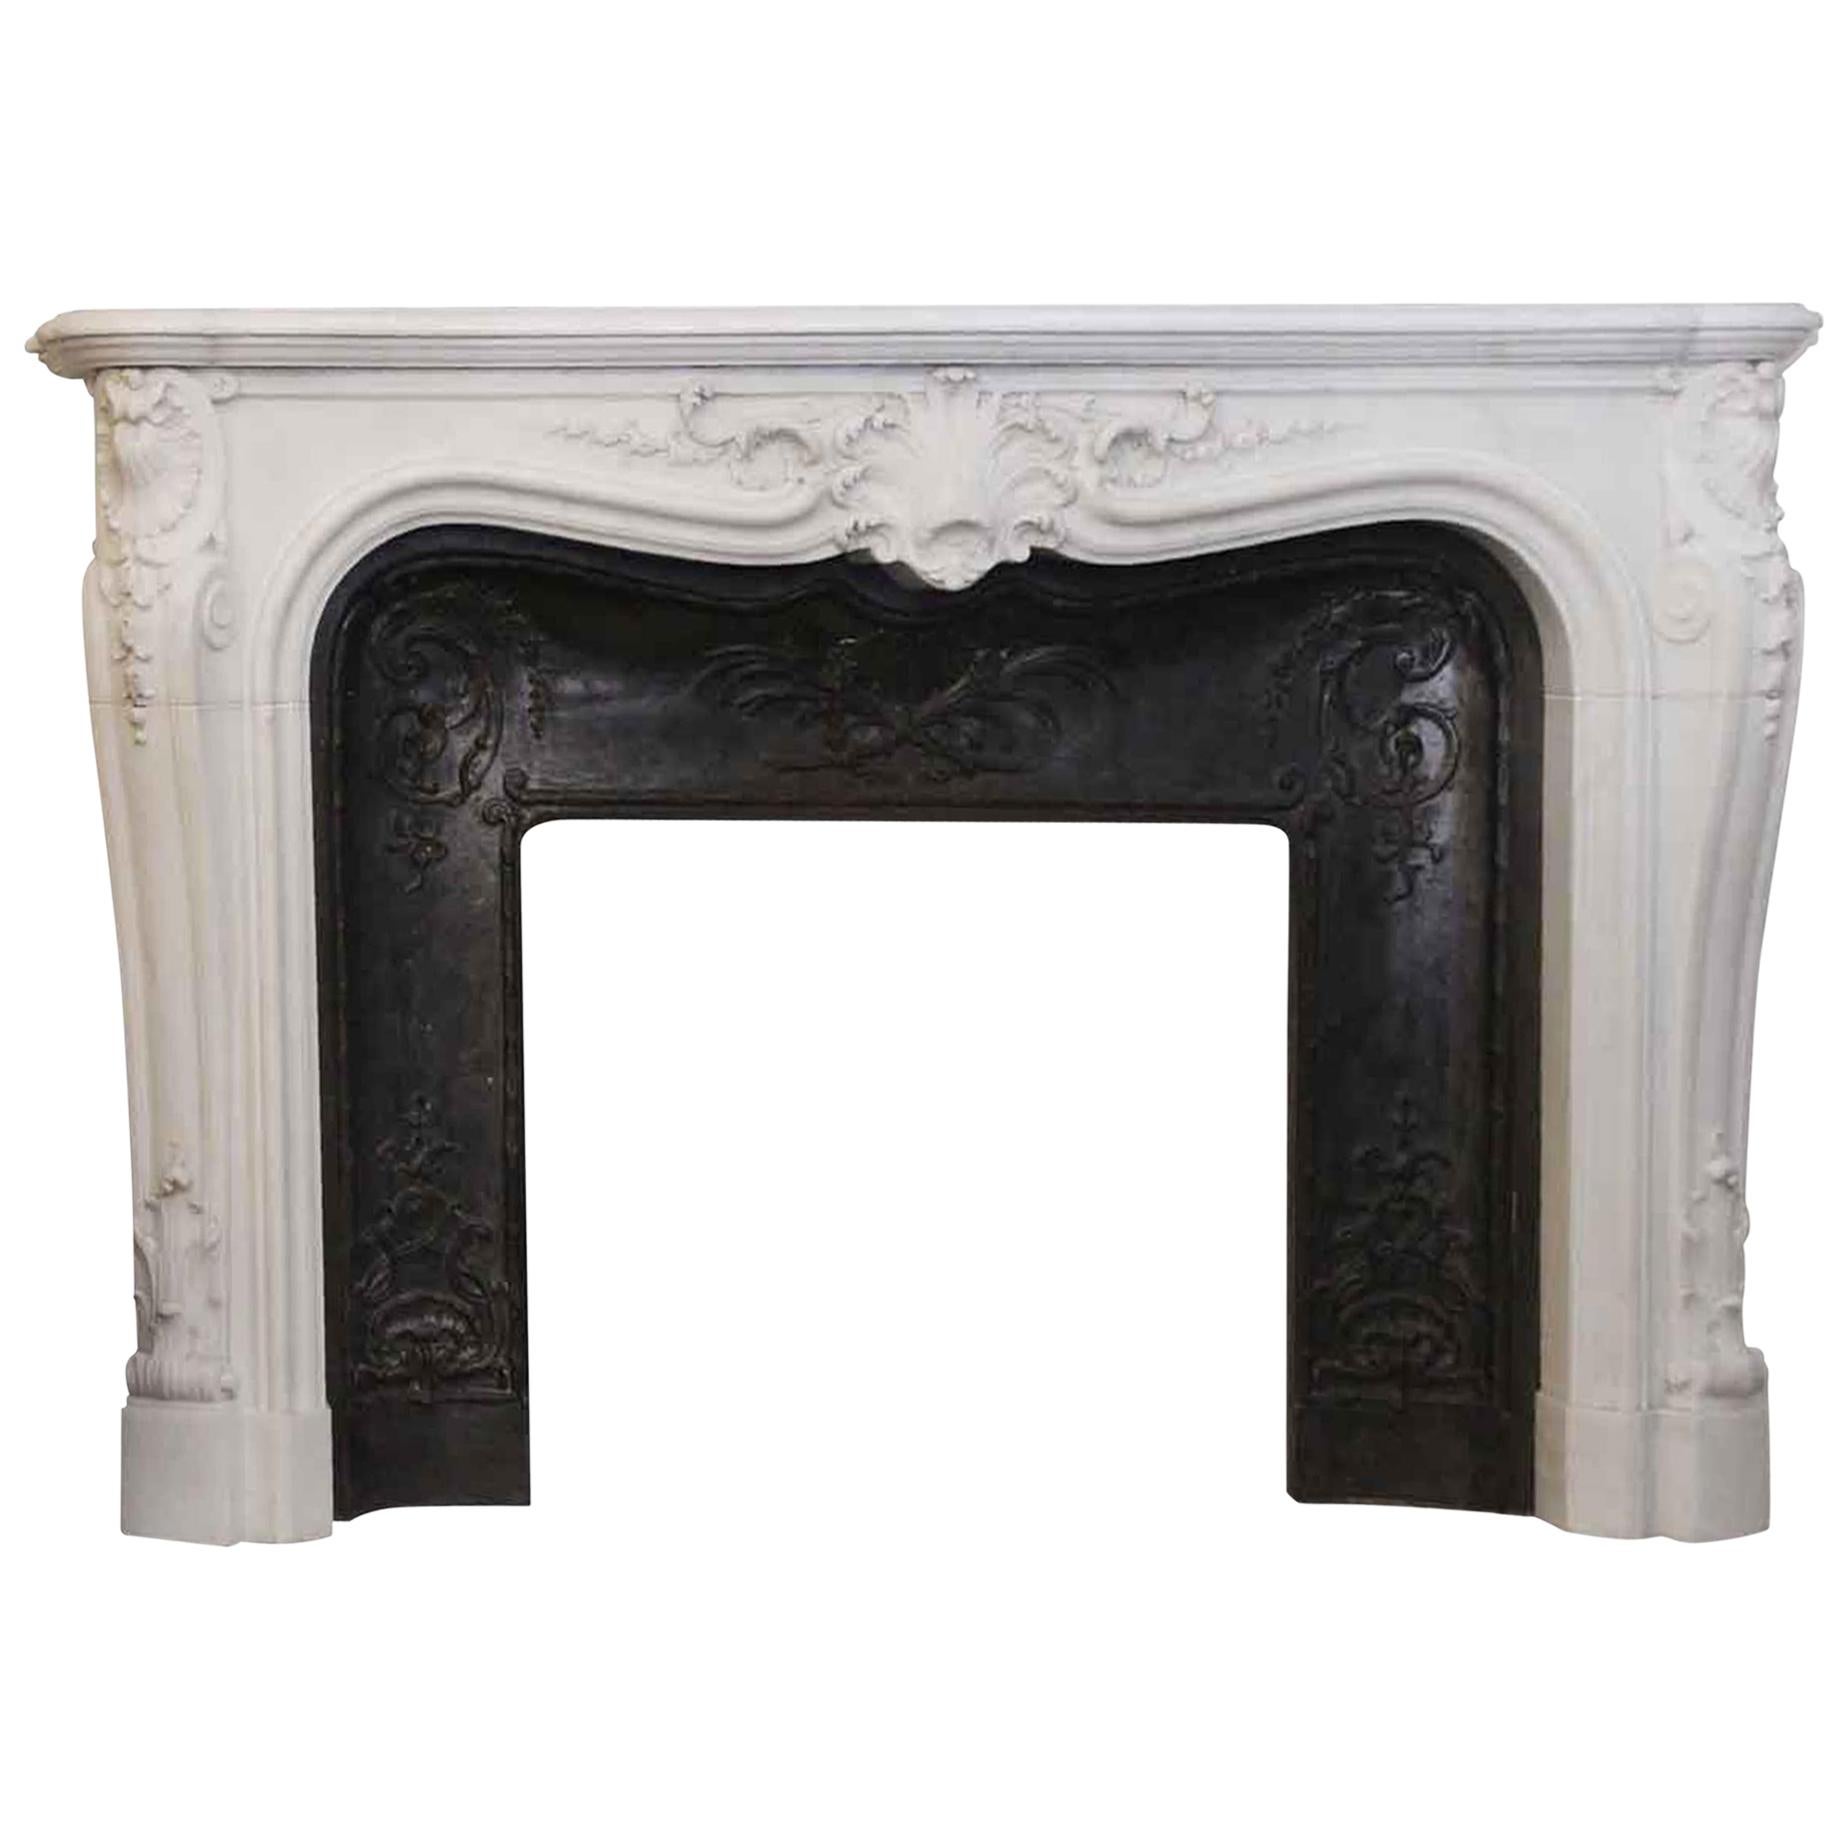 1870s French Heavily Hand Carved Marble Mantel with Cast Iron Insert